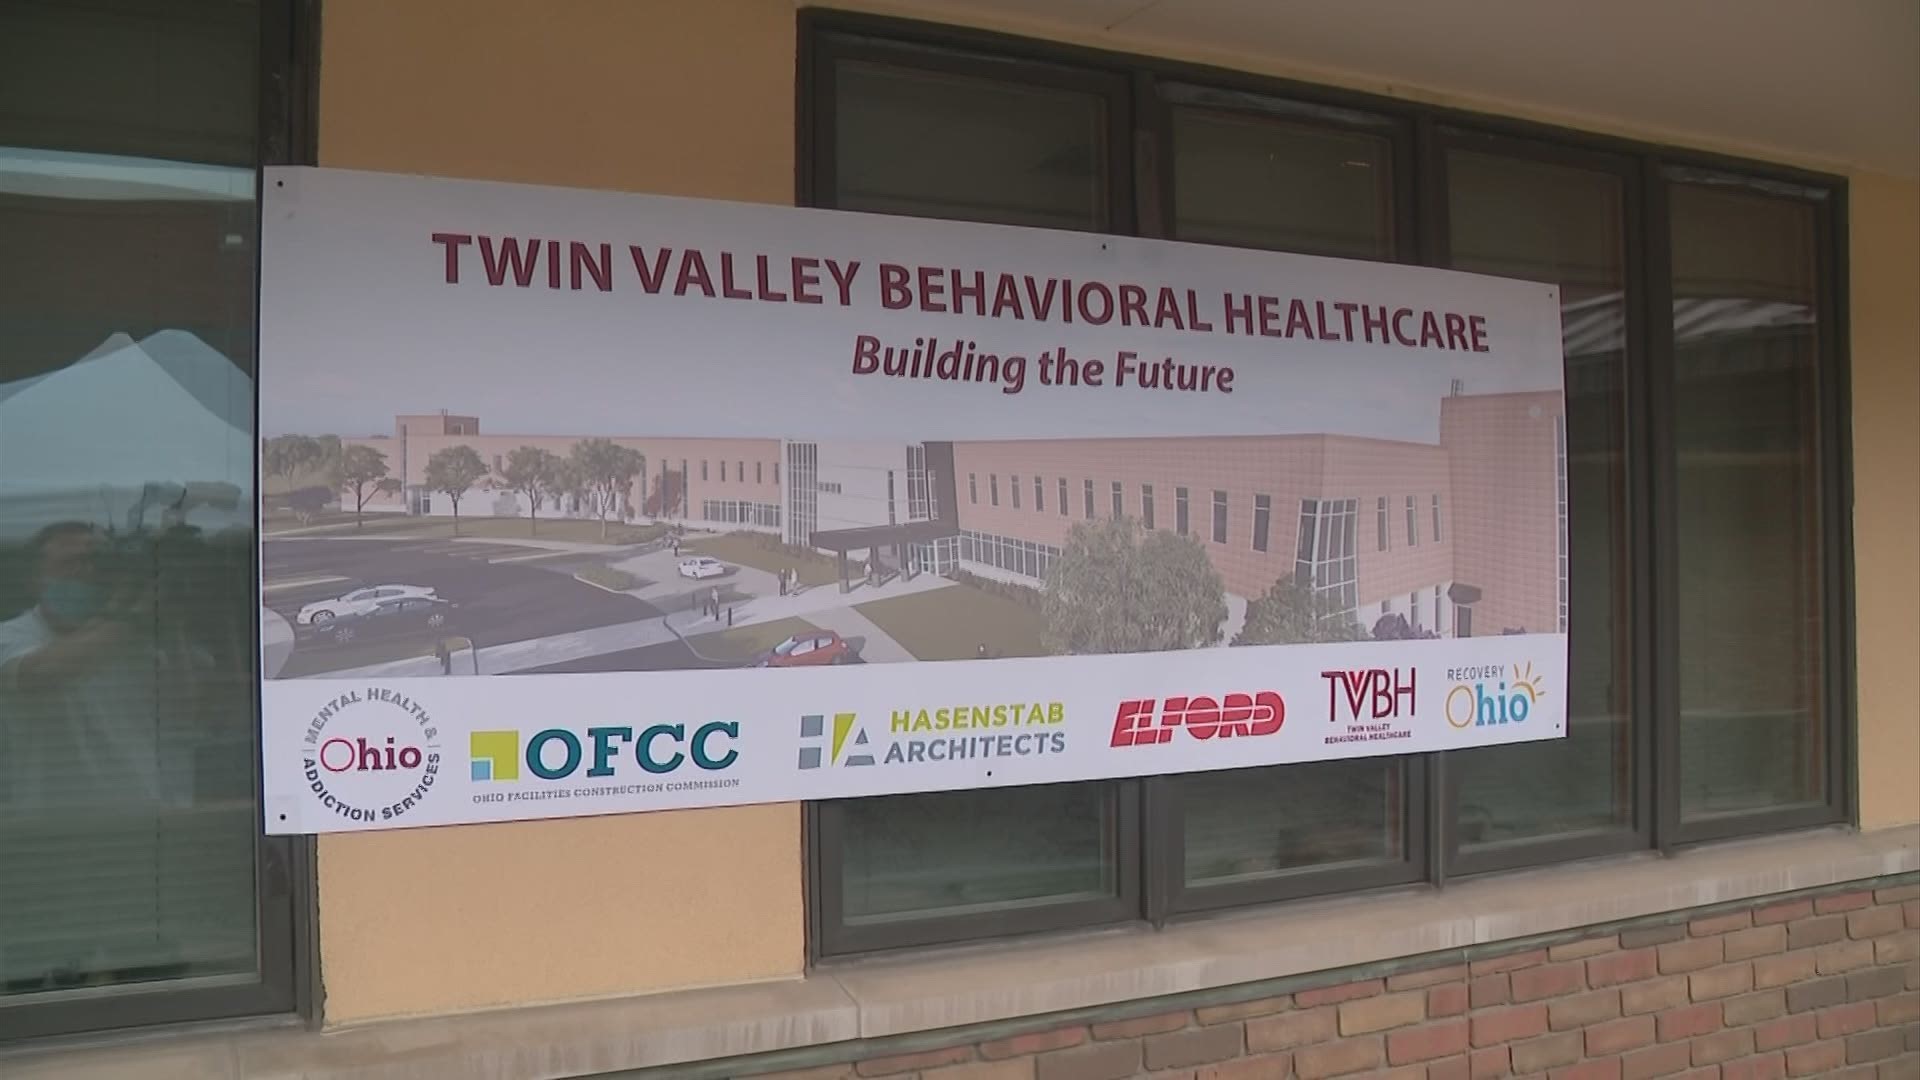 The Twin Valley Behavioral Hospital won't be open until 2023, but state leaders say the new hospital will add more than 30 beds.